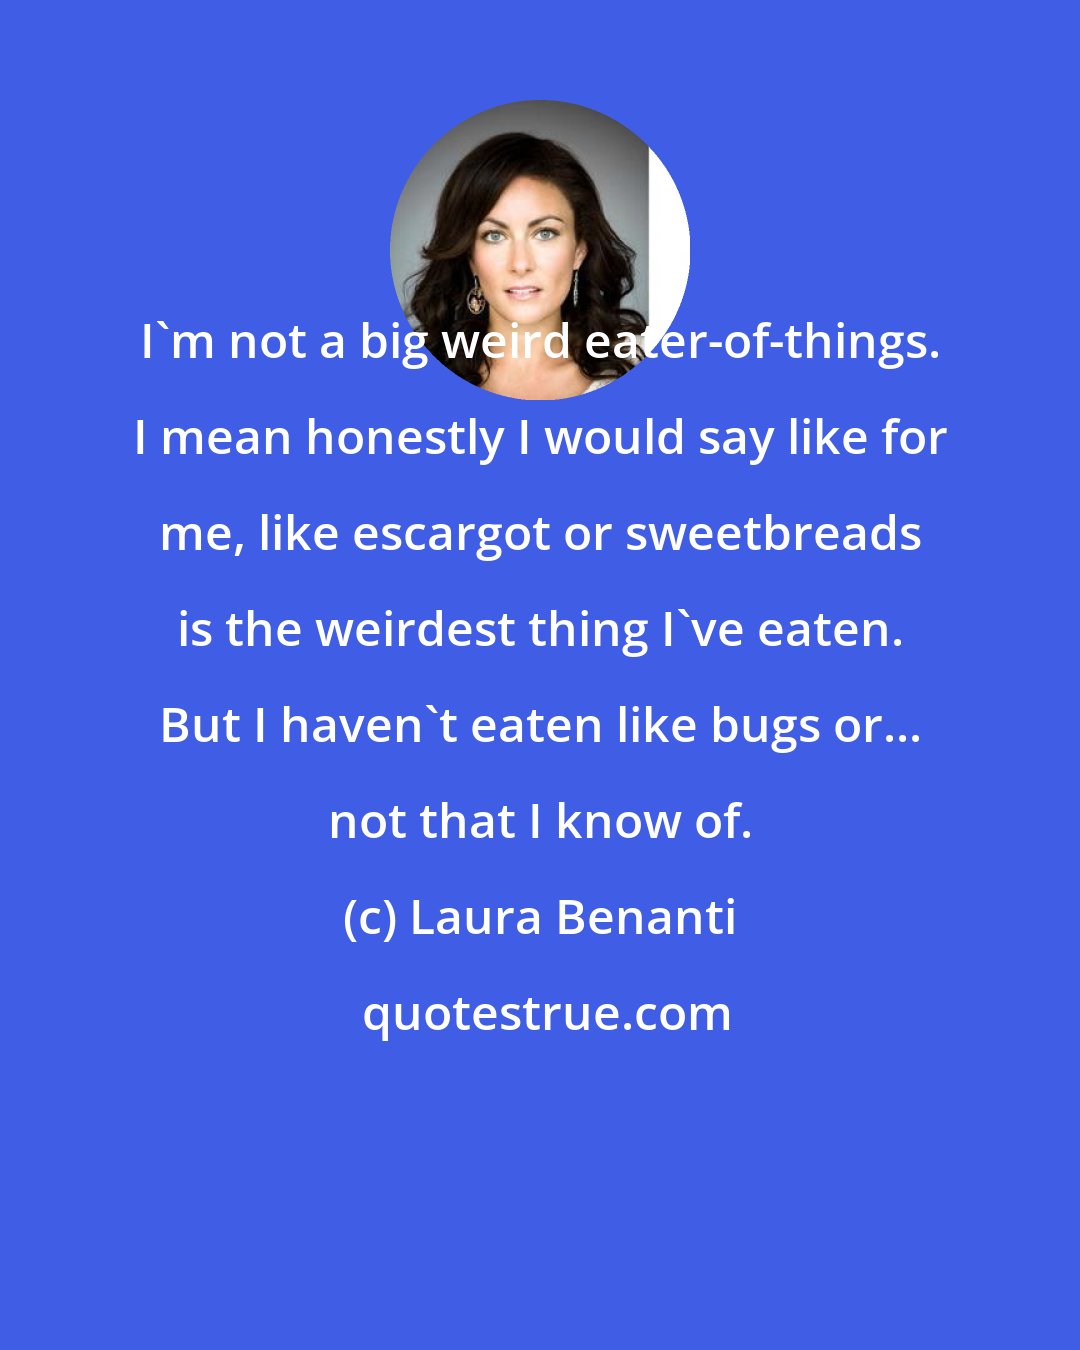 Laura Benanti: I'm not a big weird eater-of-things. I mean honestly I would say like for me, like escargot or sweetbreads is the weirdest thing I've eaten. But I haven't eaten like bugs or... not that I know of.